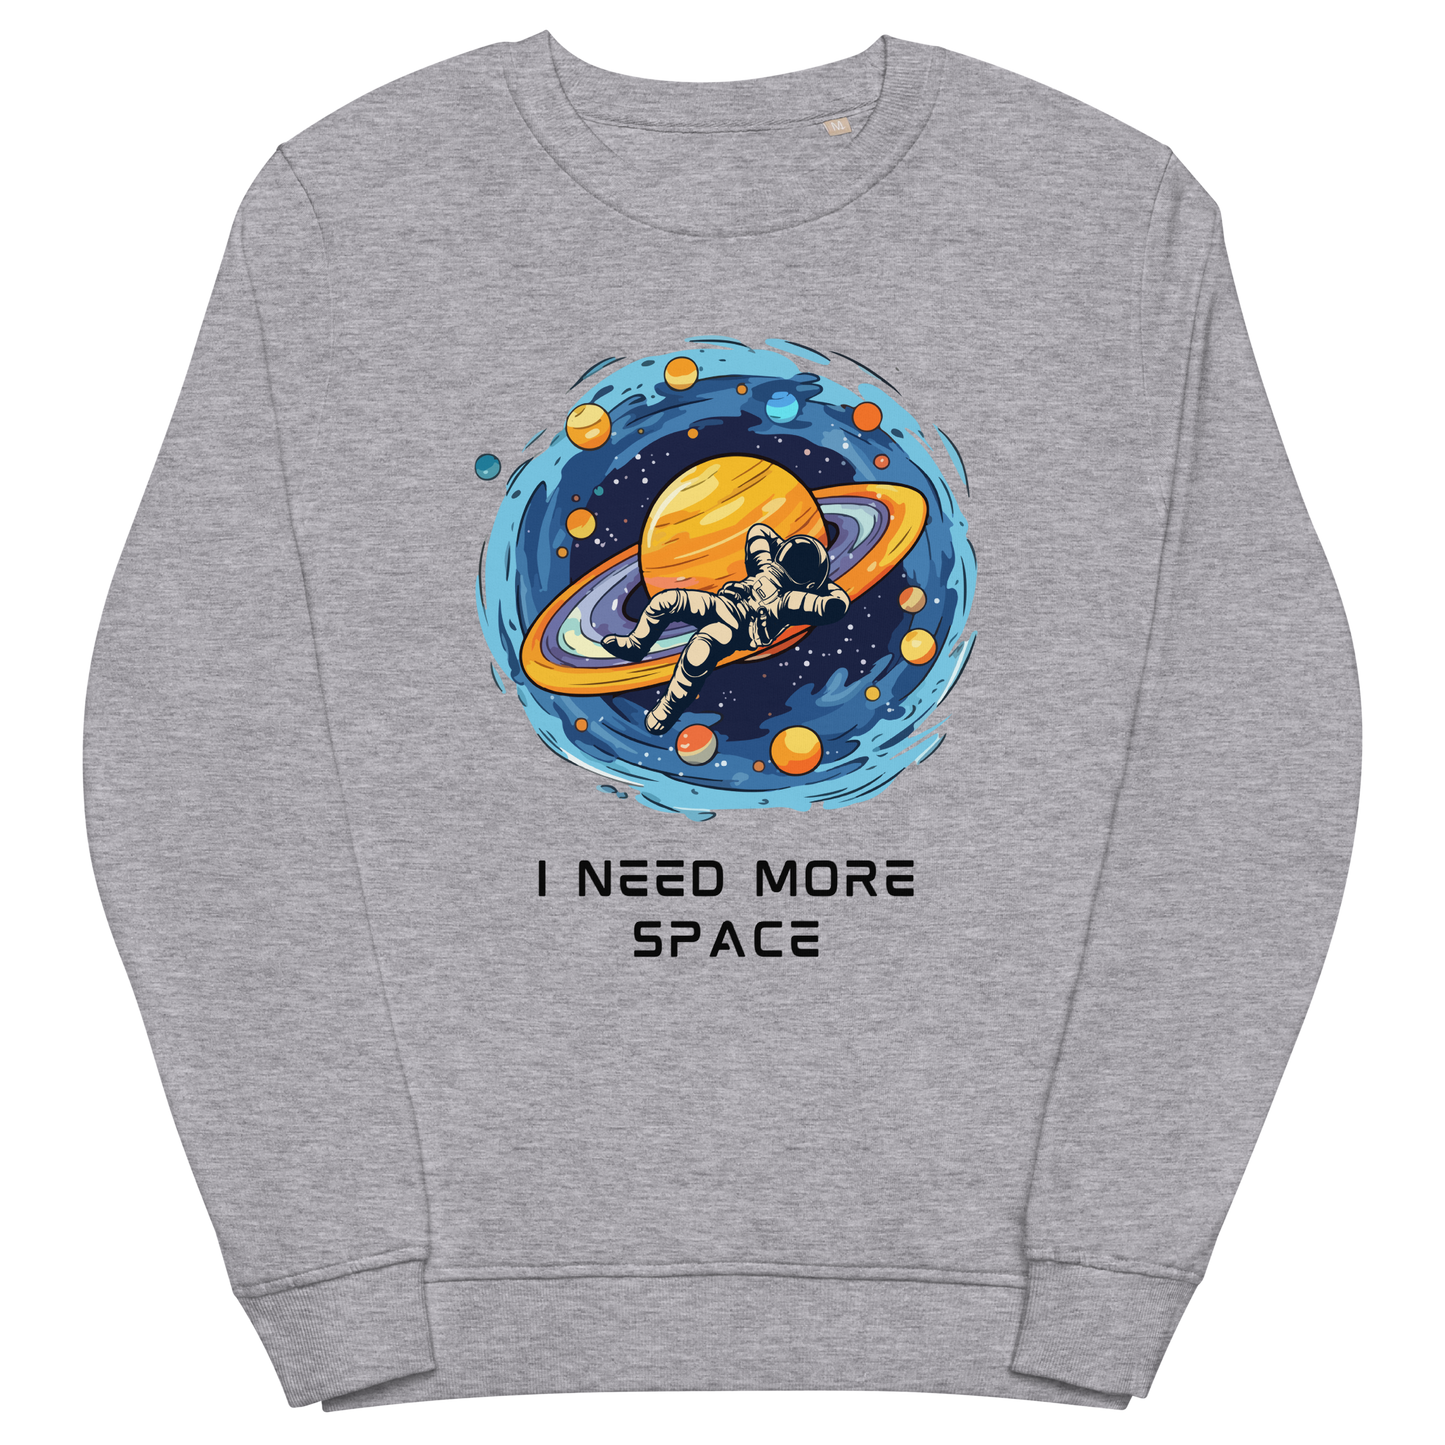 Grey Melange Organic Cotton Astronaut Sweatshirt featuring a captivating I Need More Space graphic on the chest - Funny Graphic Space Sweatshirts - Boozy Fox